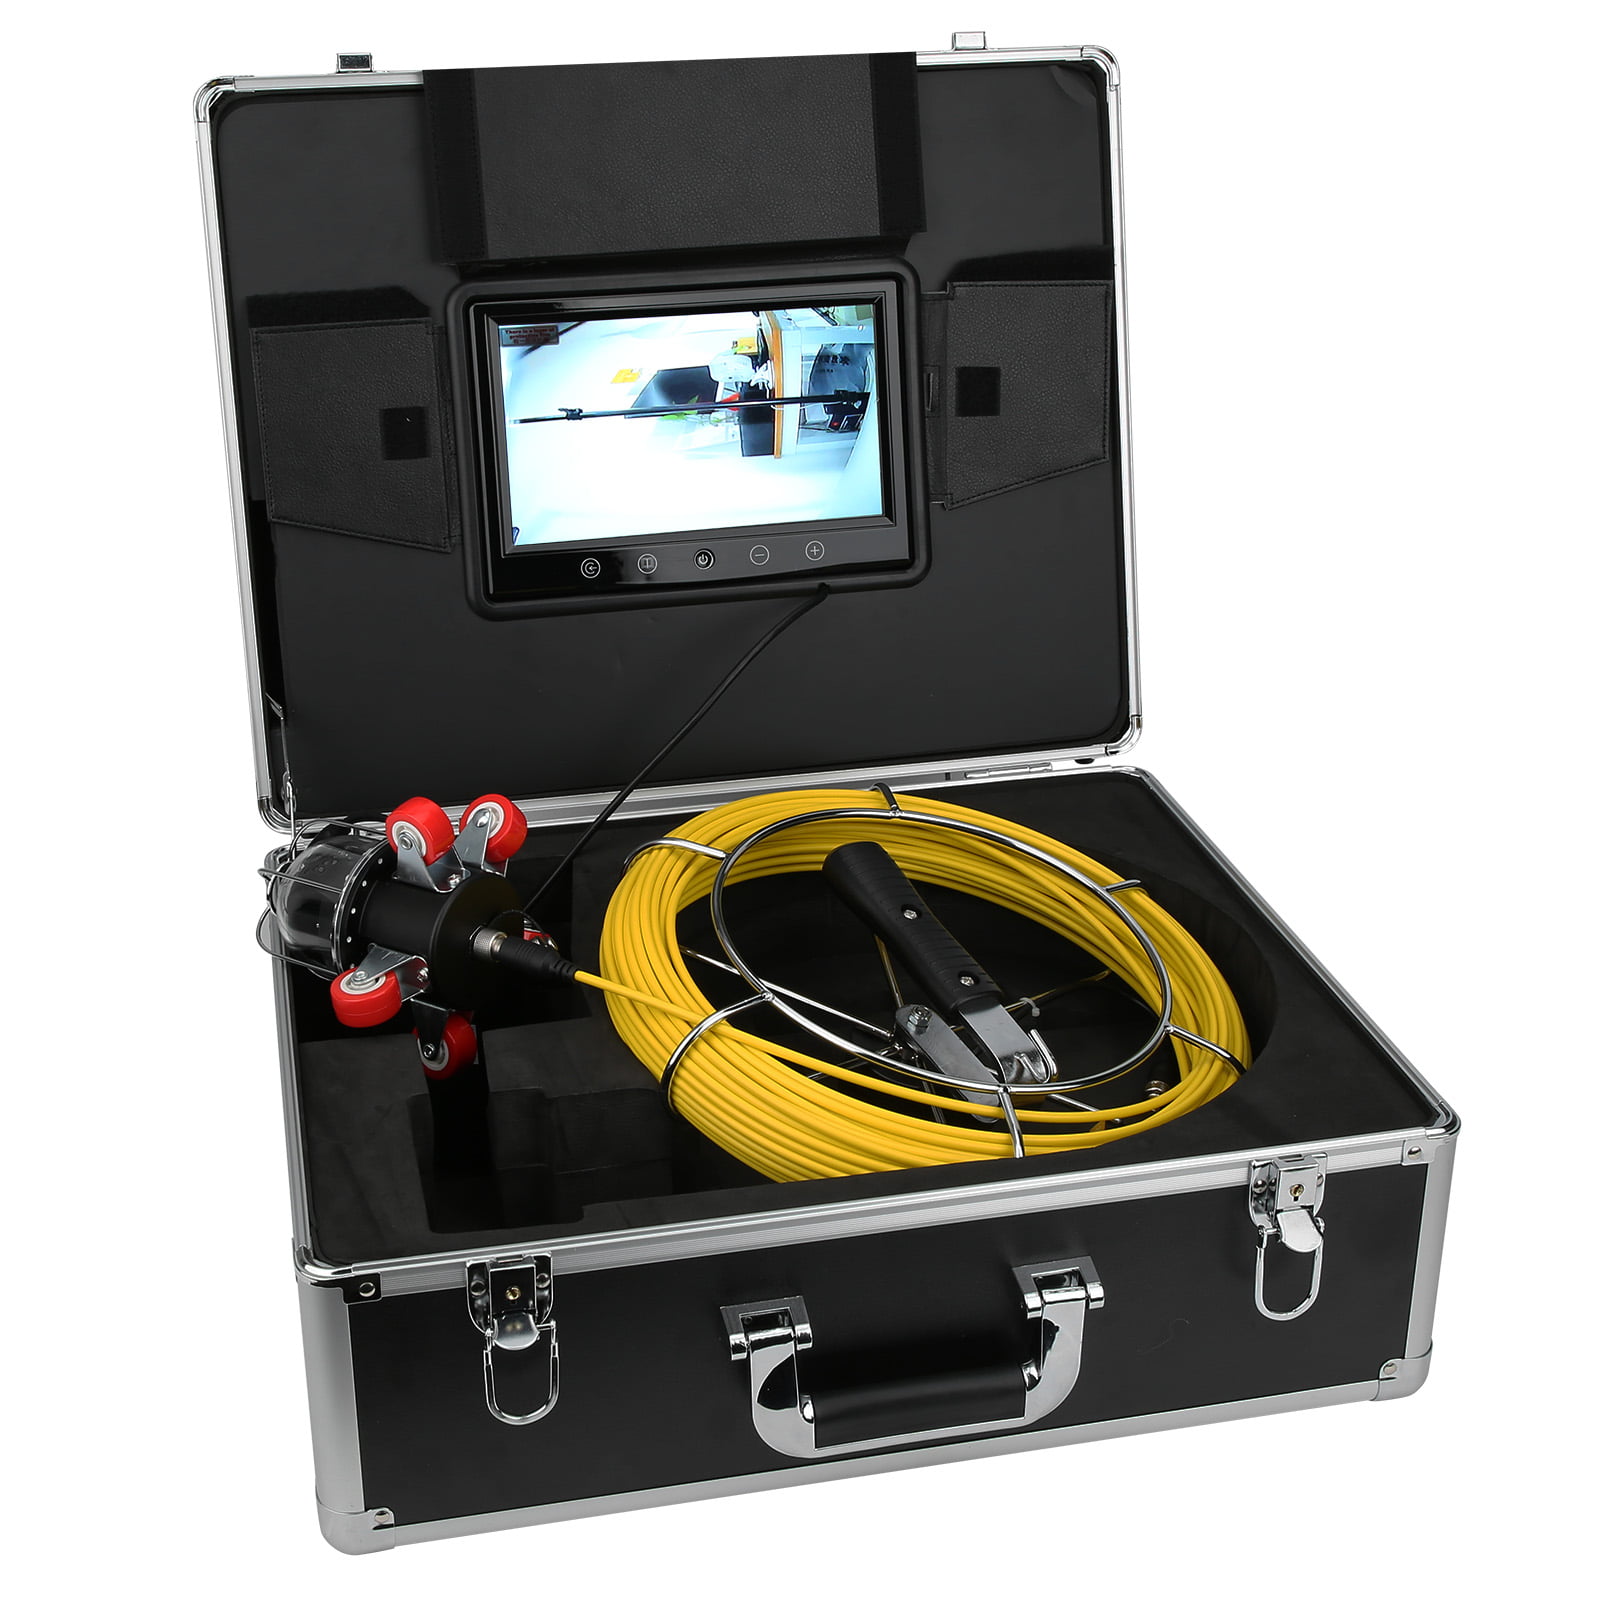 100-240V American Standard WiFi IP Camera IP68 Endoscope 98.4ft Cable for Pipe Inspection 